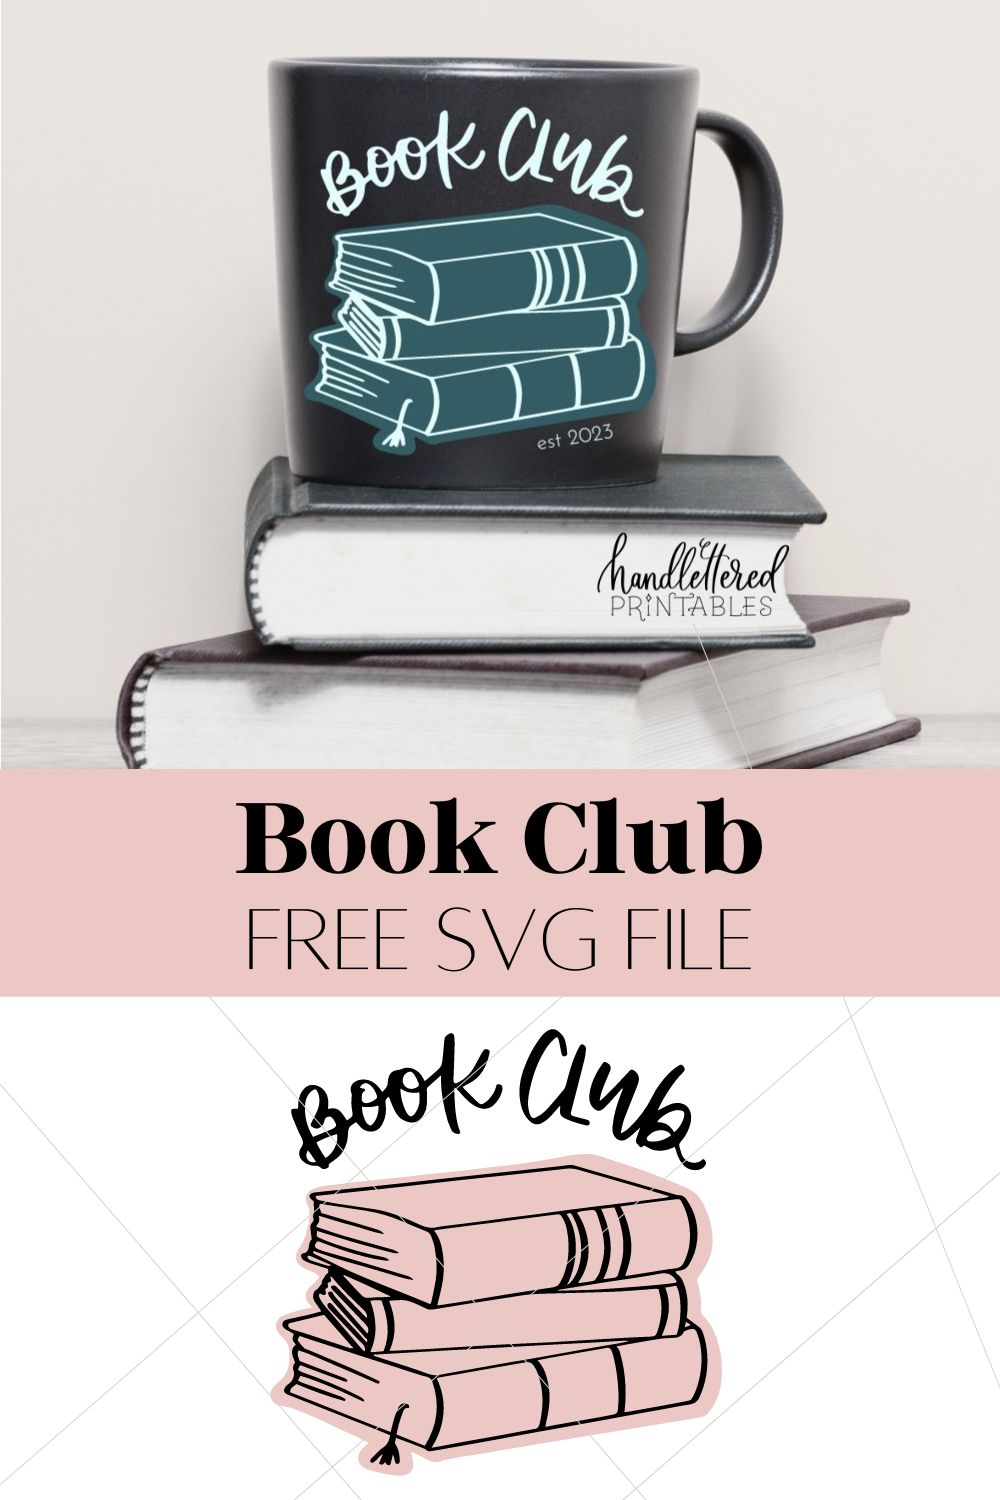 Book Club Free SVG File (title text) Top image of the SVG file (stacked books with hand lettered 'book club) applied to a black mug. Bottom image of the SVG file on a white background.